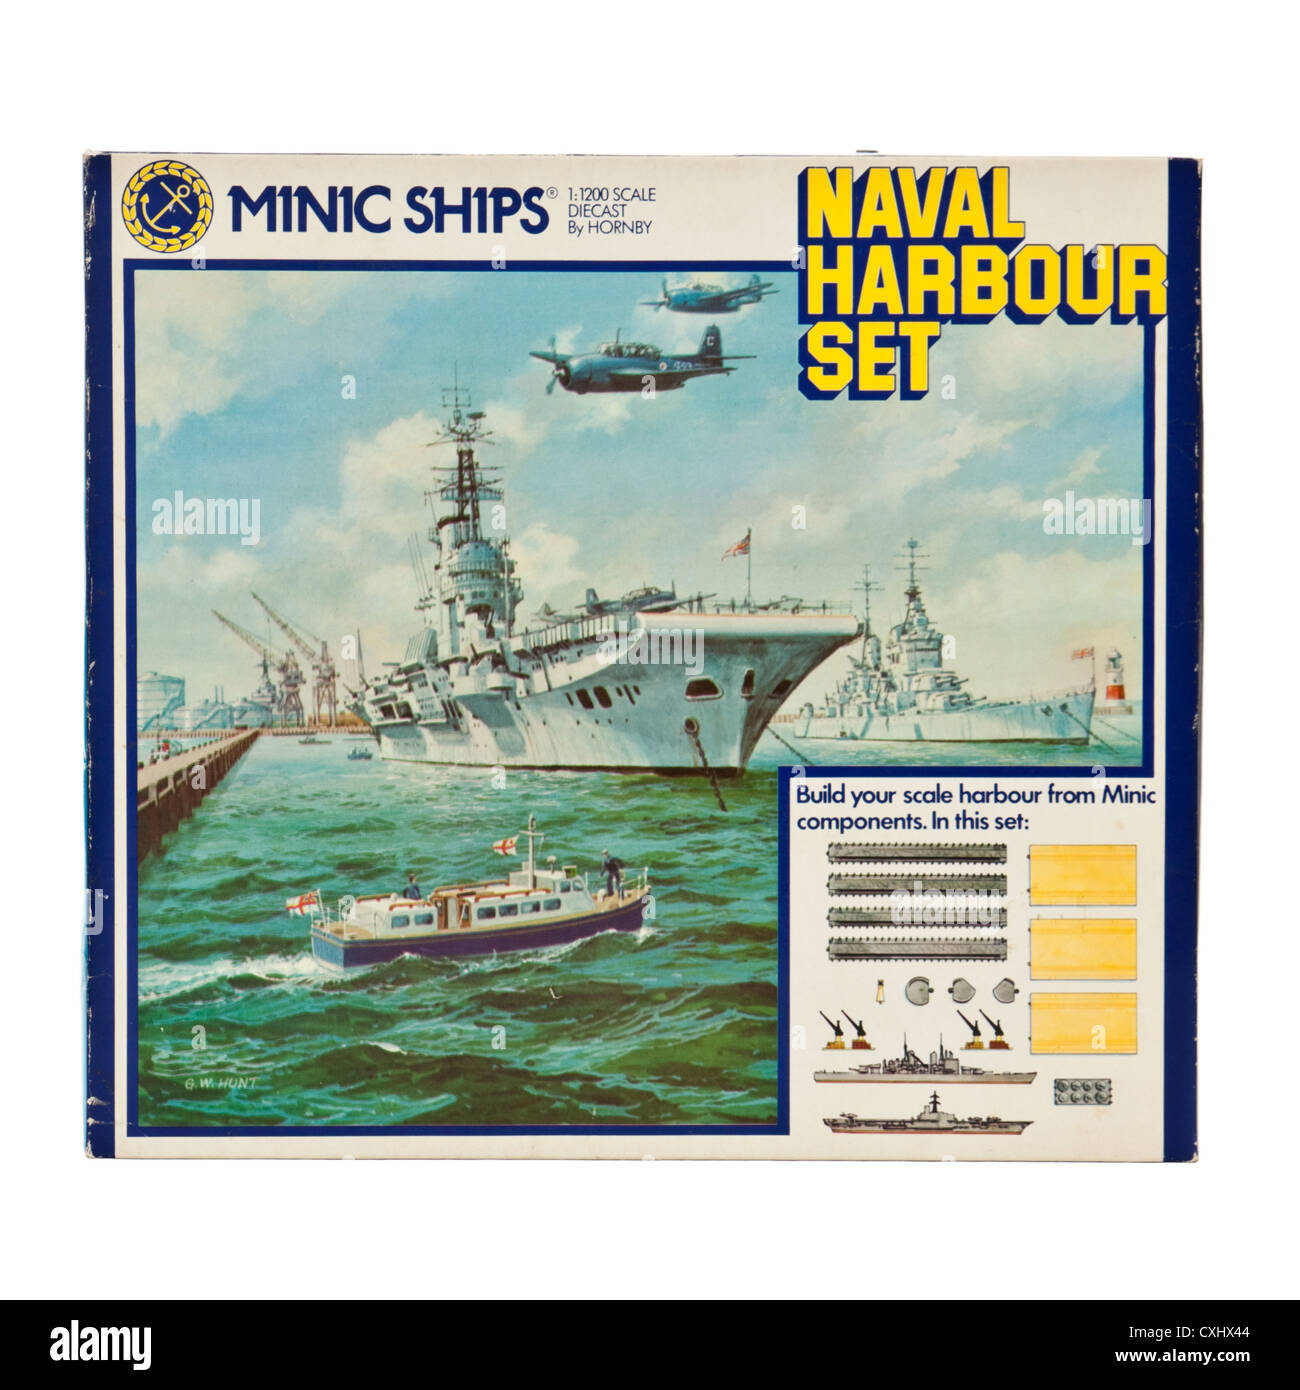 Vintage 1970's MINIC SHIPS (Hornby) 1:1200 scale Naval Harbour Set. Stock Photo